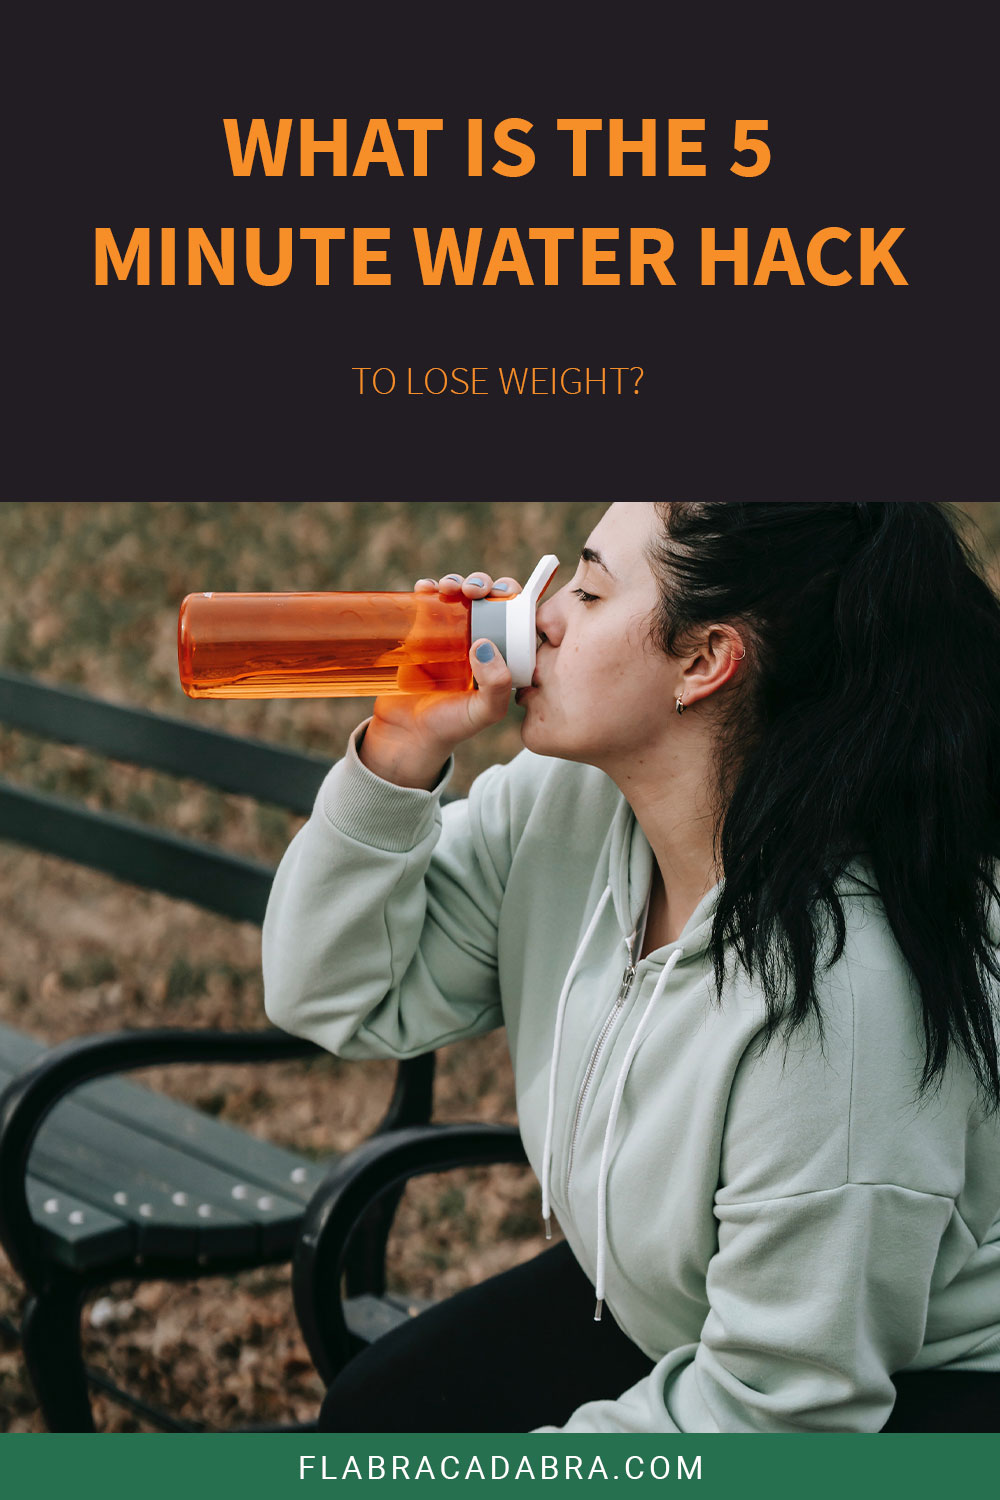 What is the 5 Minute Water Hack to Lose Weight?